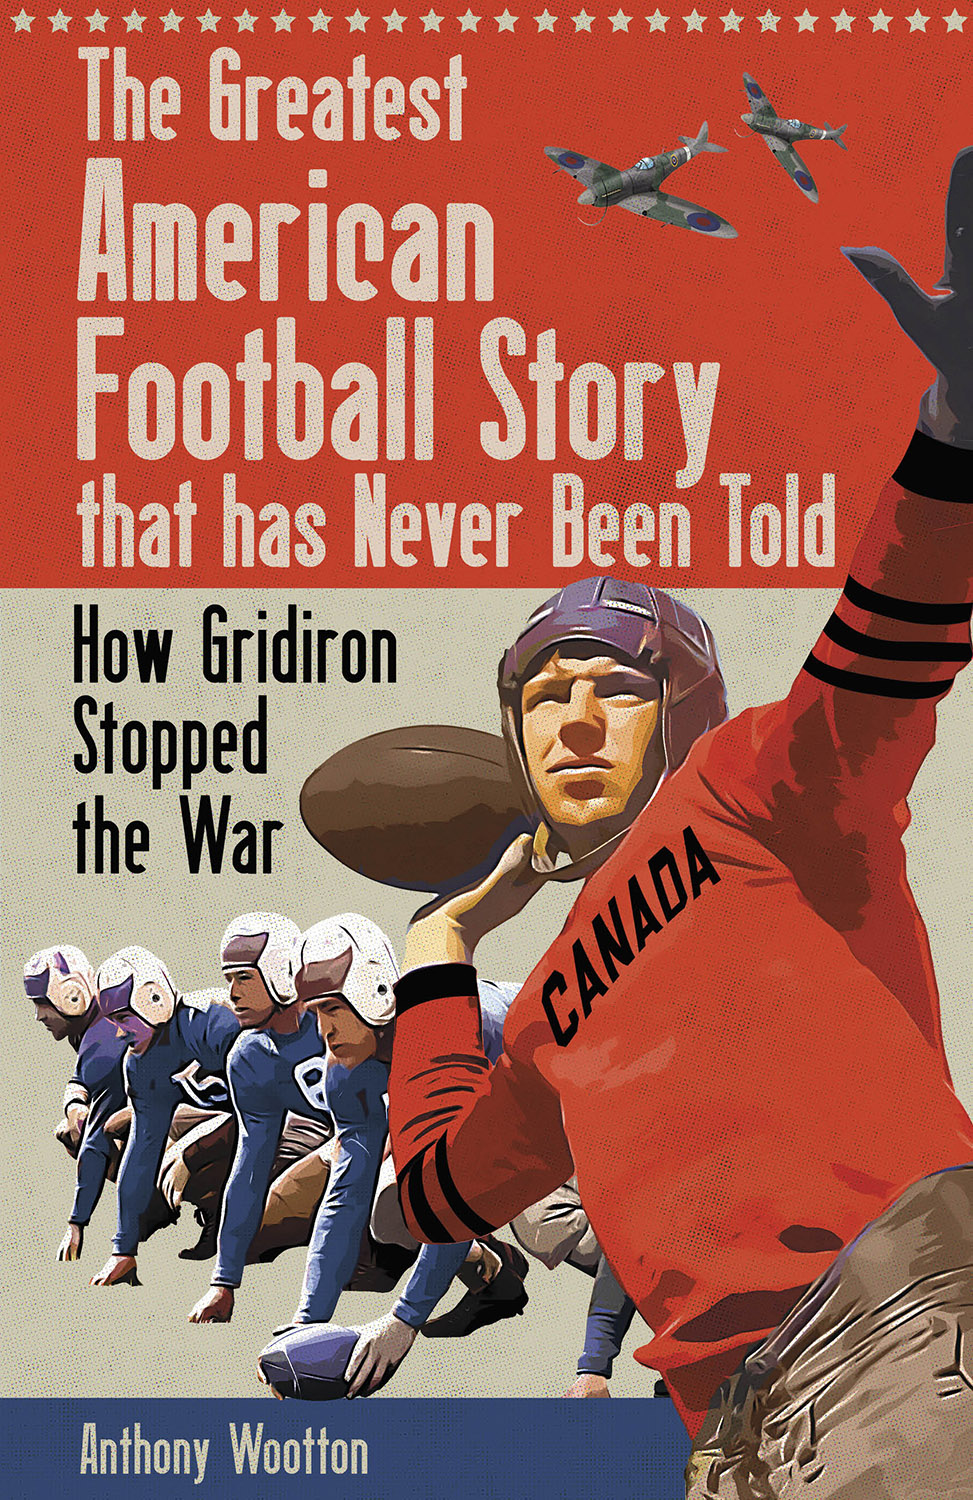 The Greatest American Football Story that has Never Been Told